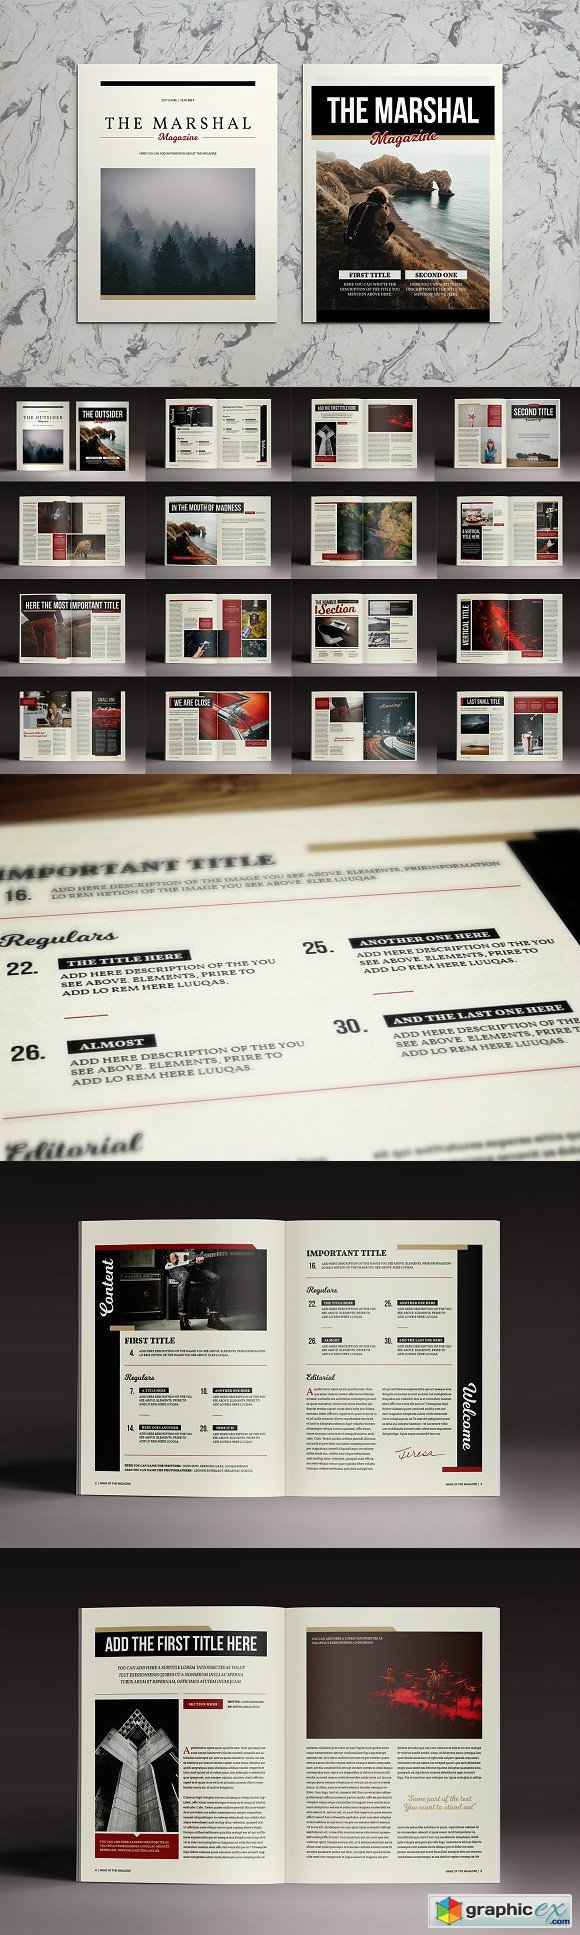 The Outsider Magazine Template